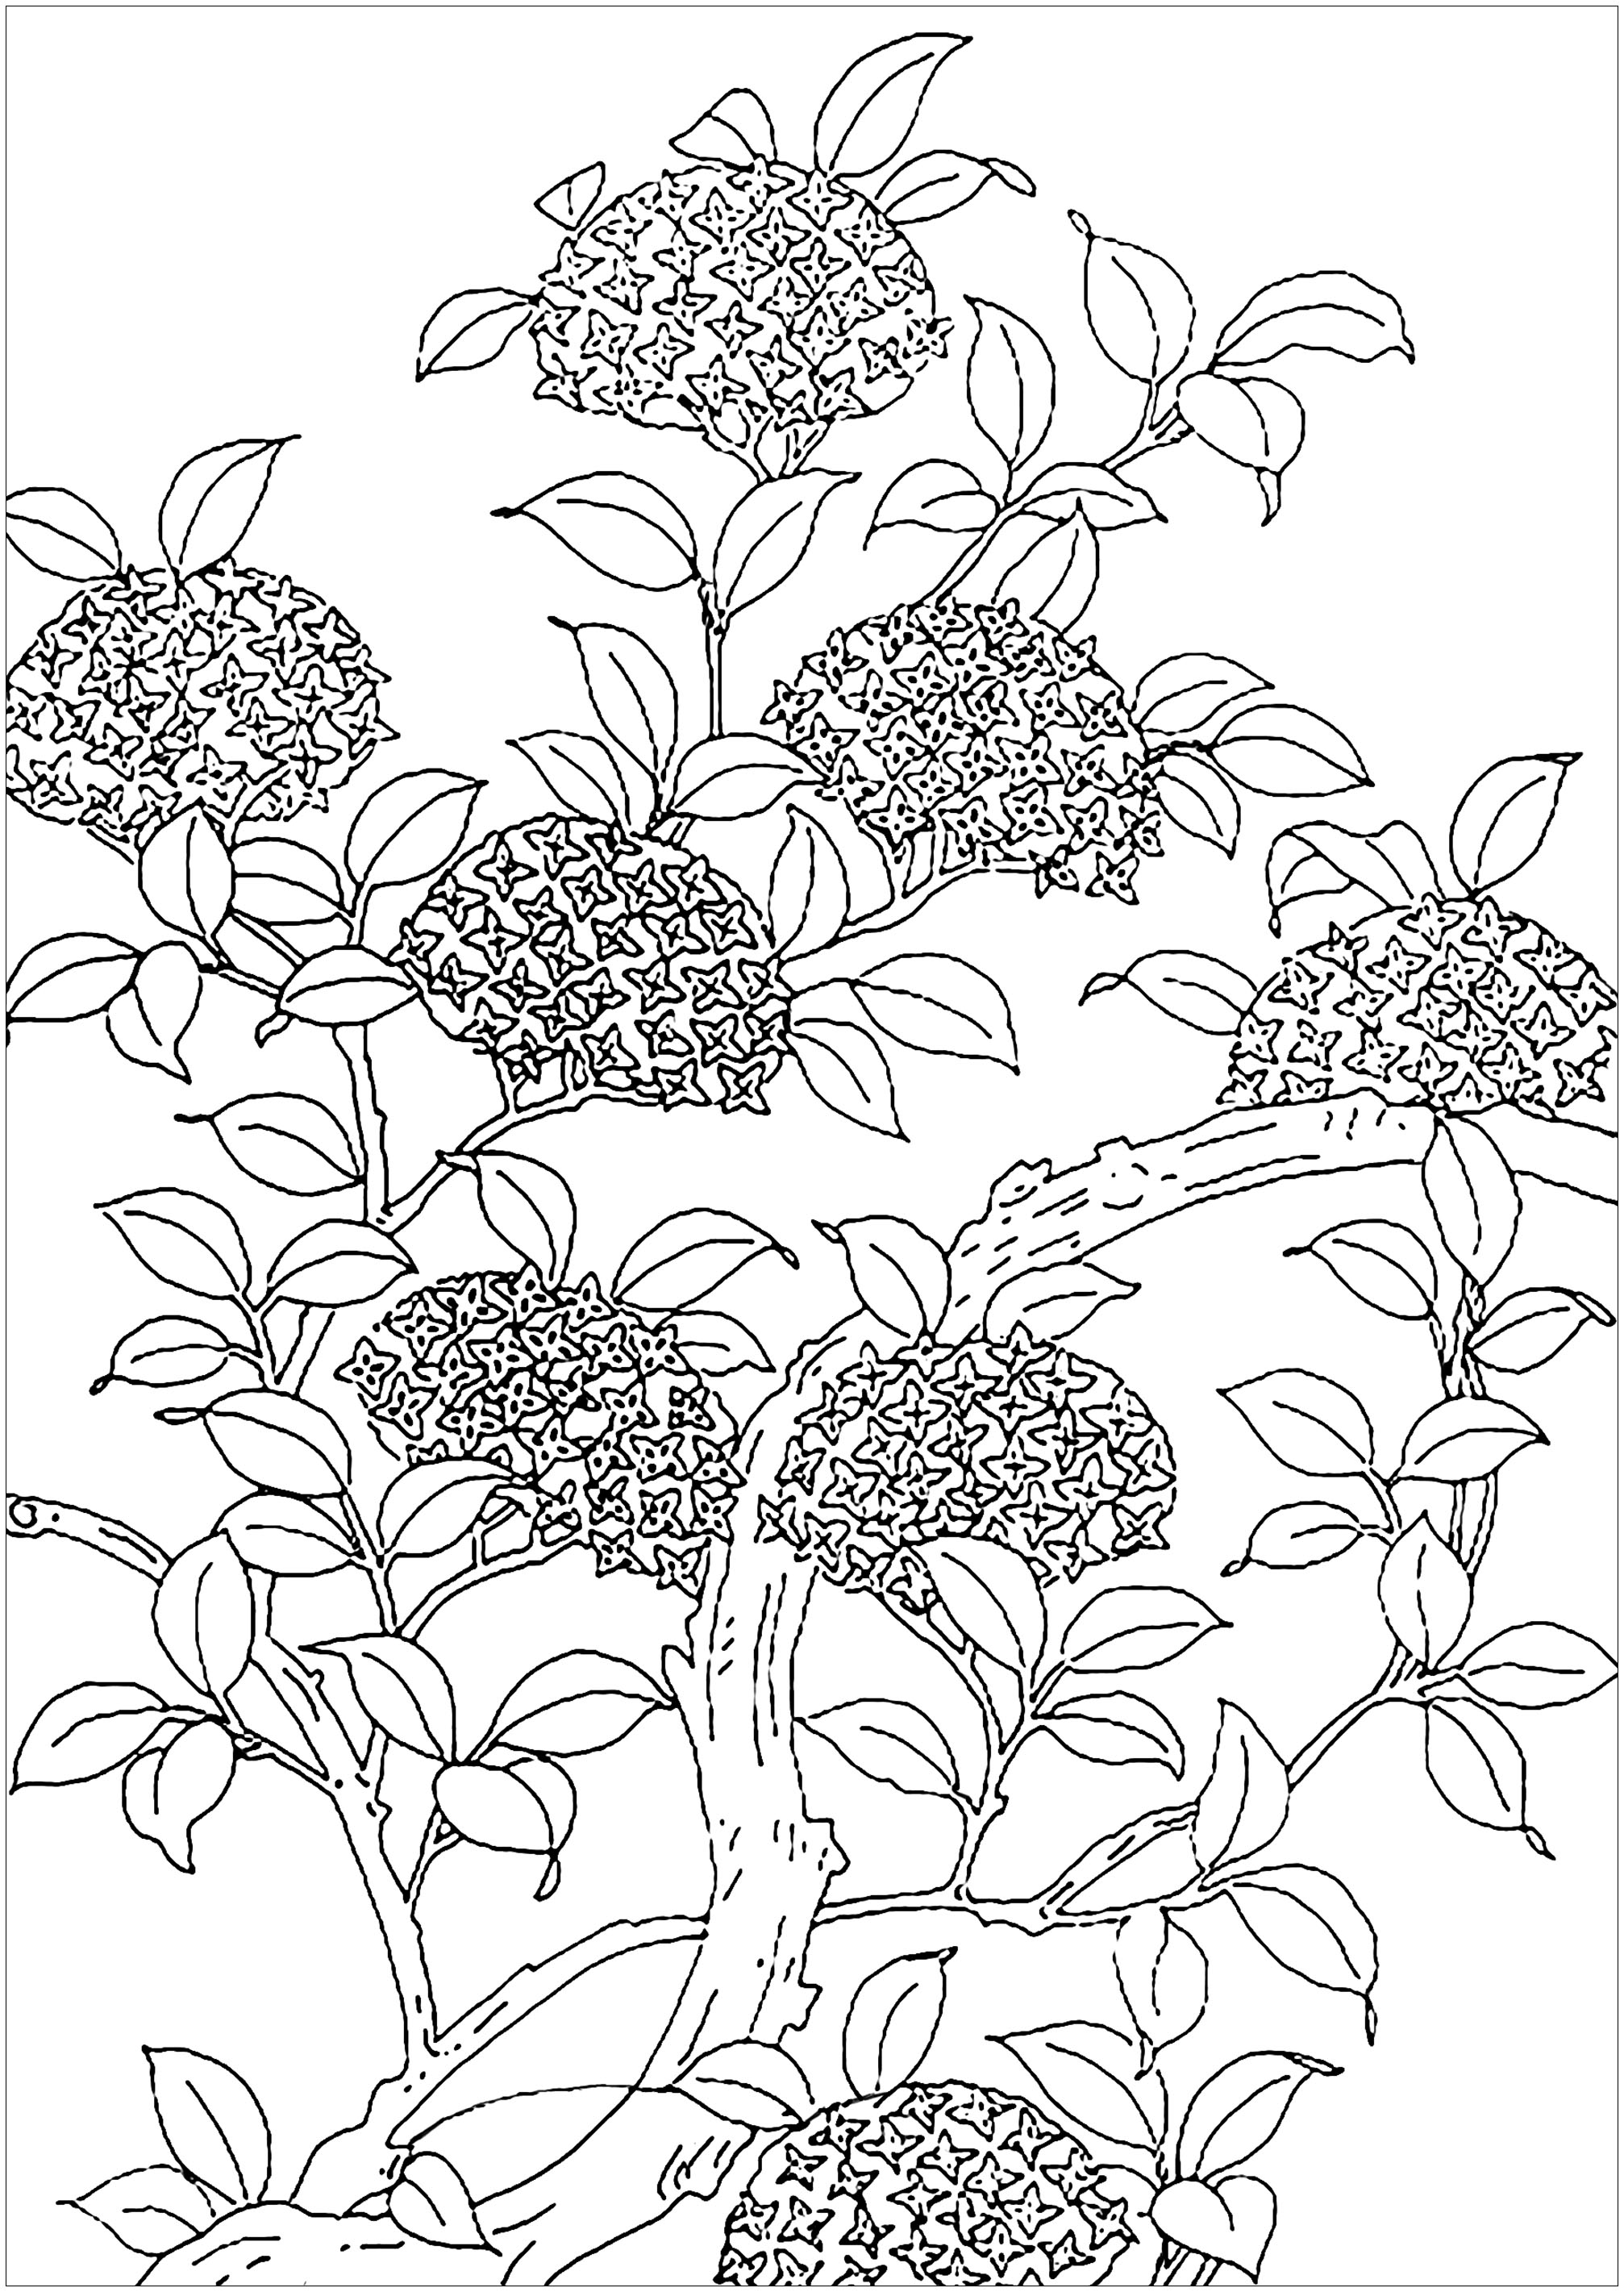 Nice flowered tree. Coloring page created from an old illustration, Artist : Art. Isabelle